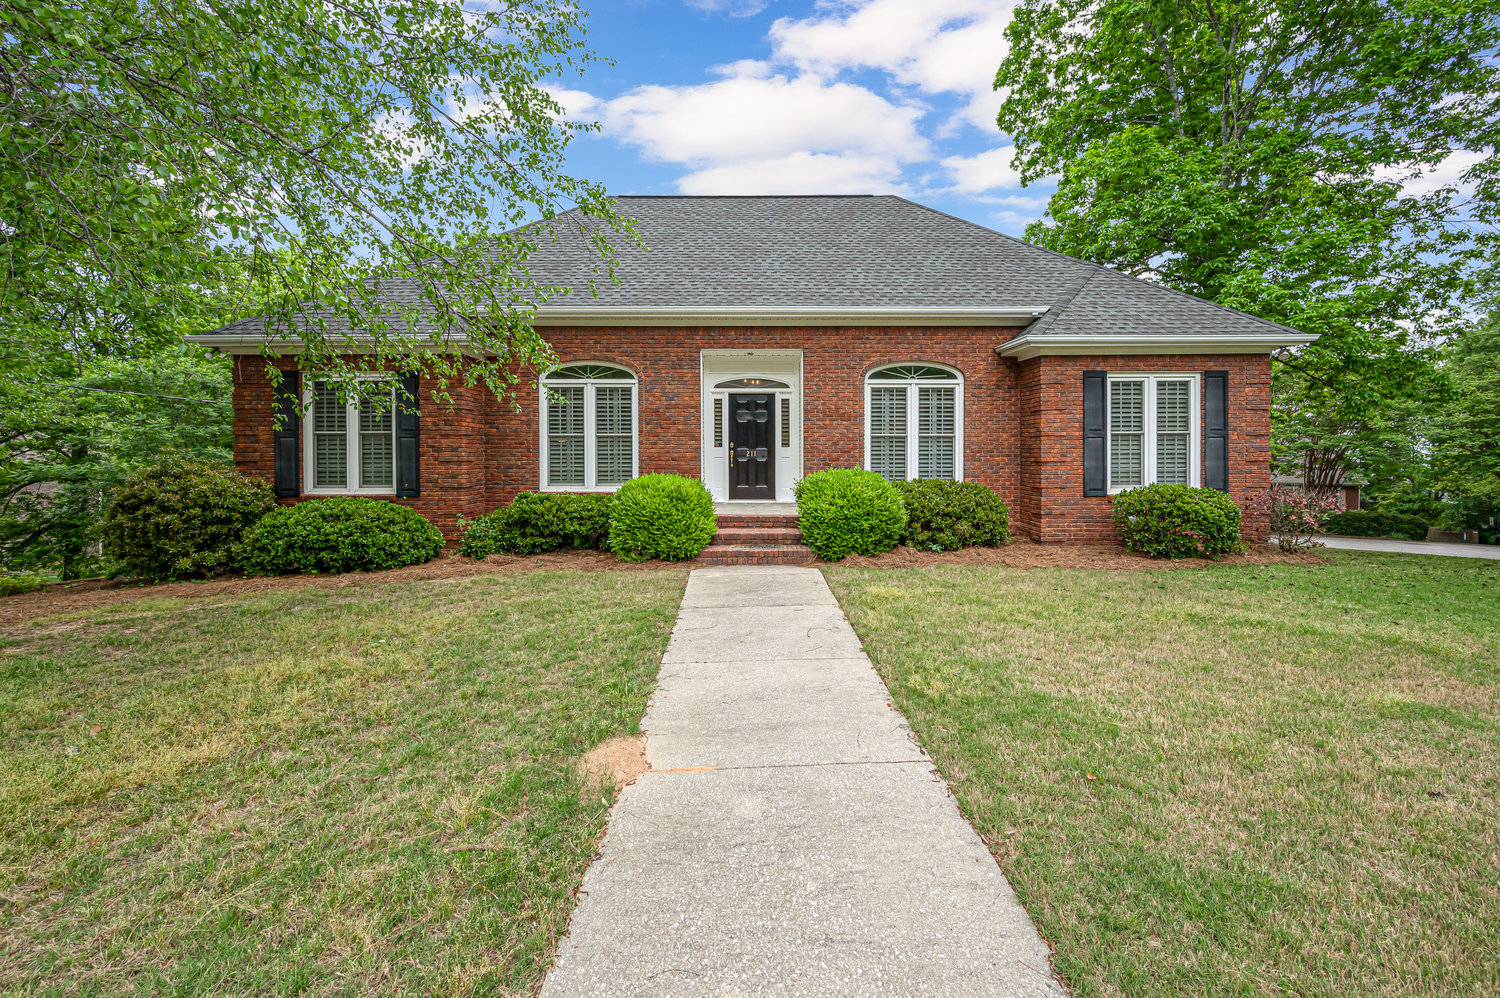 Virtual Tour of Birmingham Metro Real Estate Listing For Sale | 211 Cambo Terrace, Hoover, AL 35226